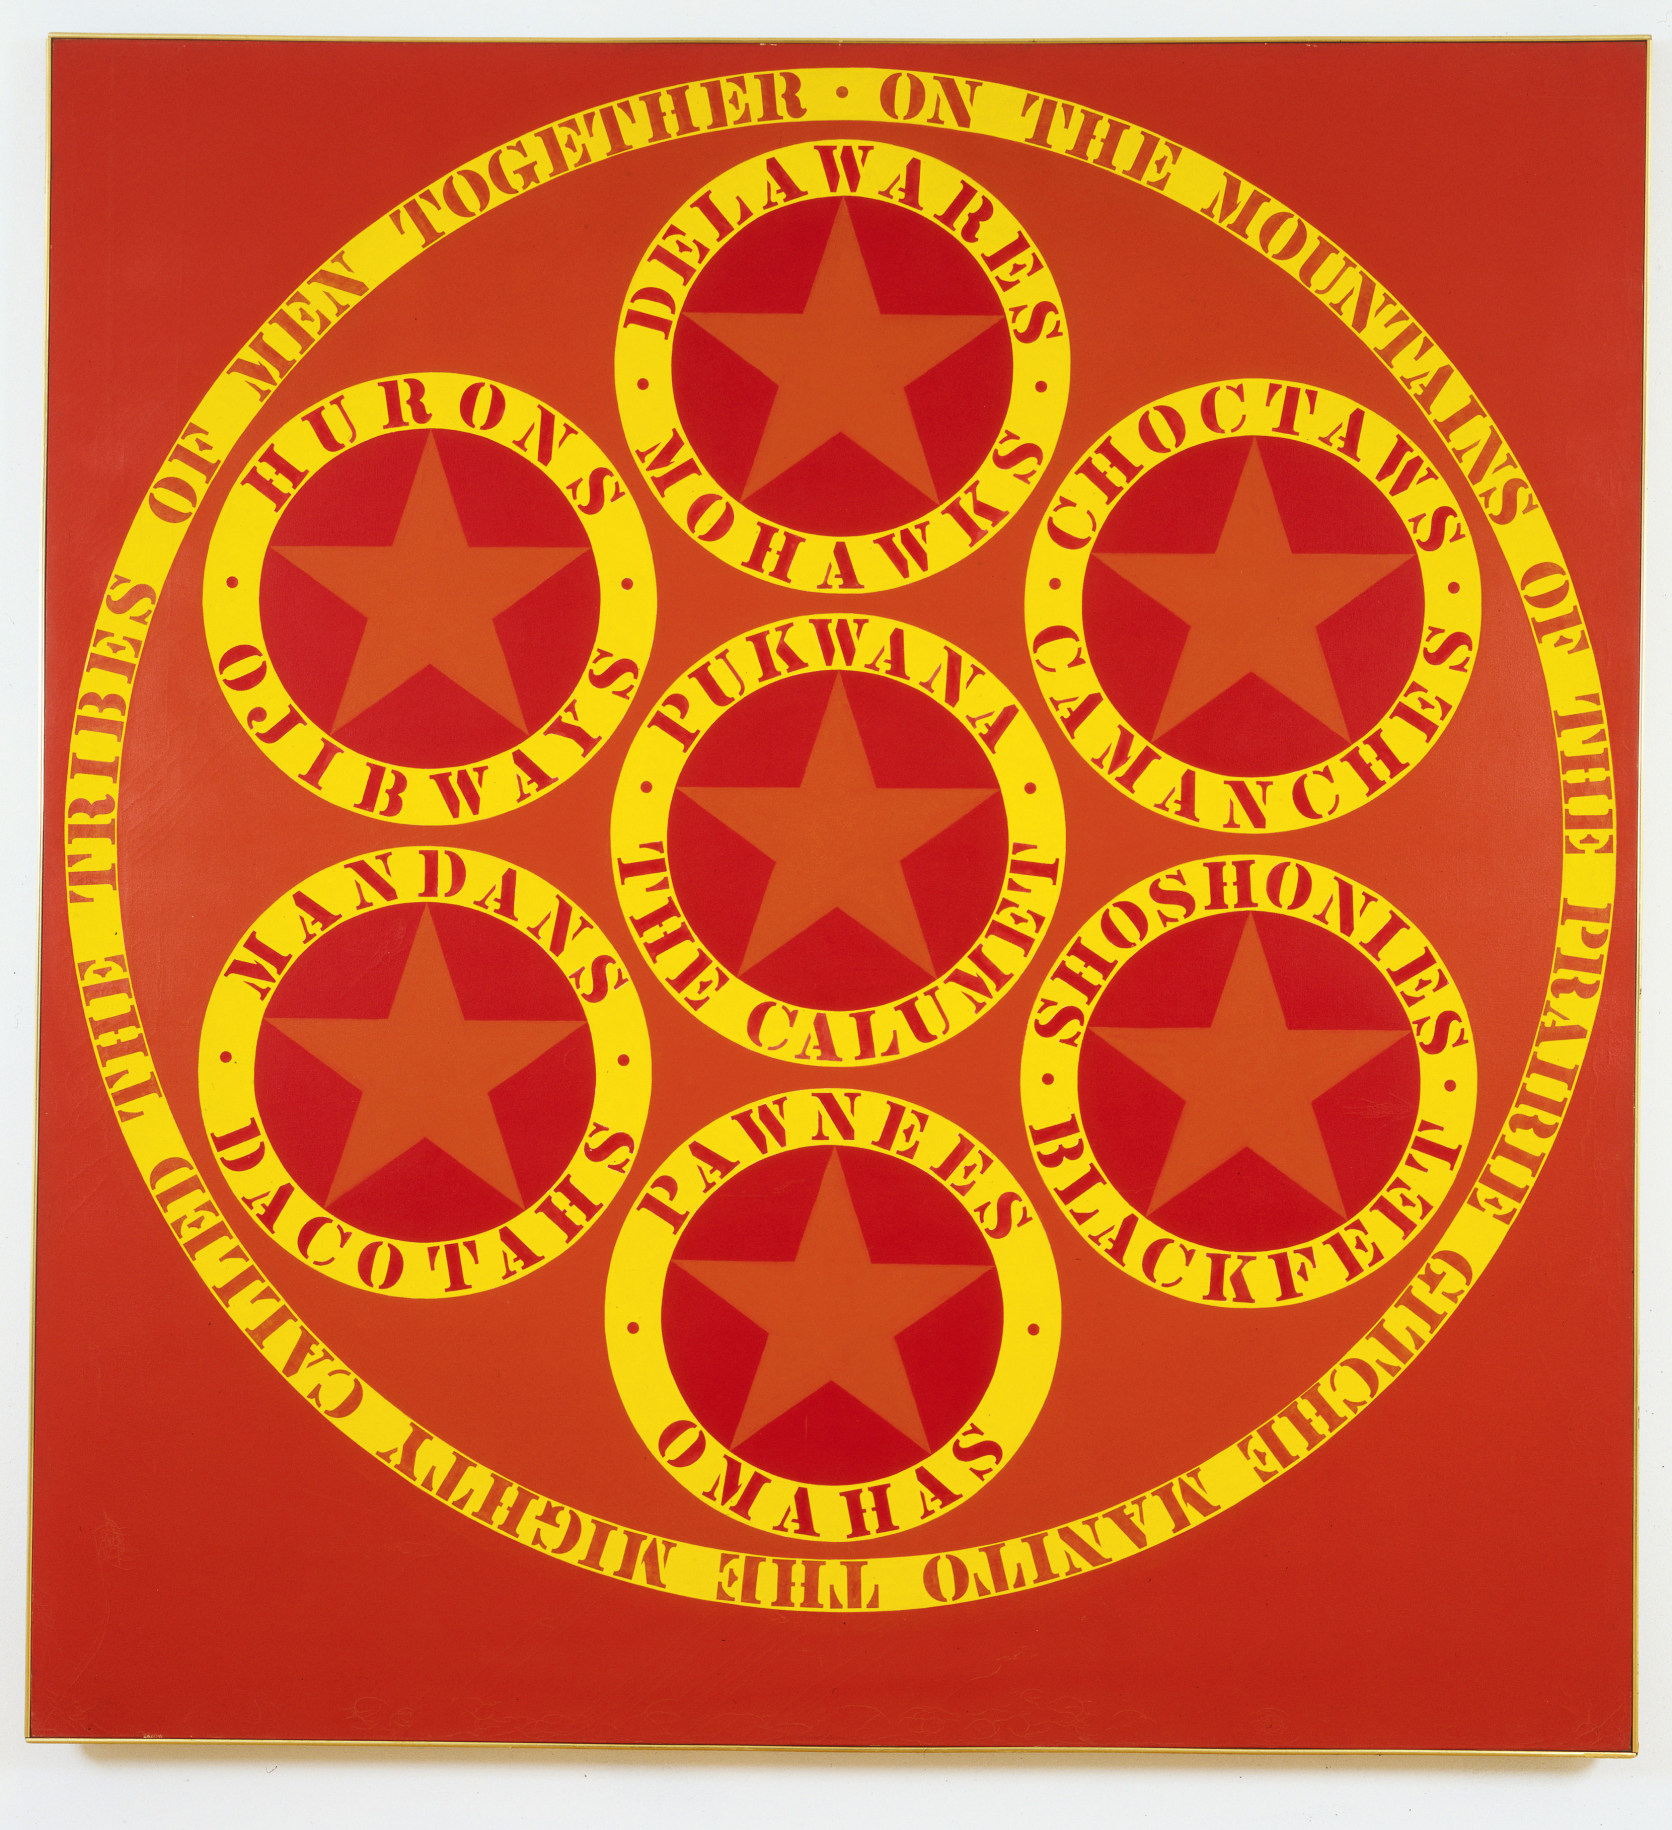 A red 90 by 84 inch canvas titled &quot;The Calumet.&quot; A large circle containing seven smaller circles dominates the canvas. The seven smaller circles each hold an orange star, and are surrounded by the names of different Native American tribes painted in red stenciled letters in an outer yellow ring.  A yellow ring encloses the large circle, and contains the red stenciled text &quot;On the mountains of the prairie Gitche Manito the mighty called the tribes of men together.&quot;